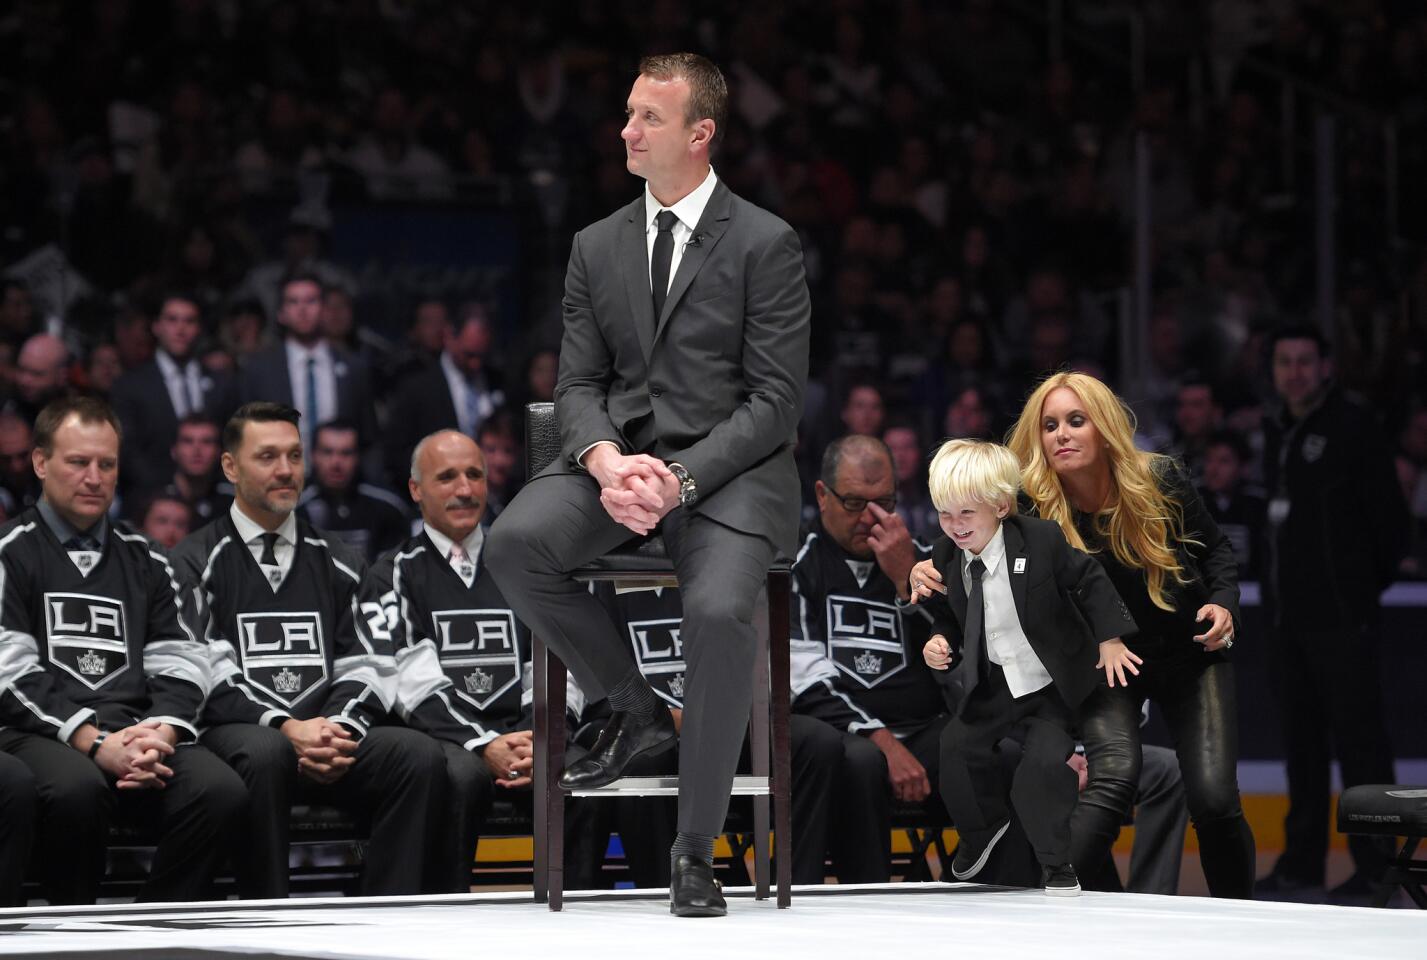 Former Kings defenseman Rob Blake listens to a speech during the ceremony to retire his jersey as his wife Brandy tries to keep their three-year-old son Max from running onto the stage.